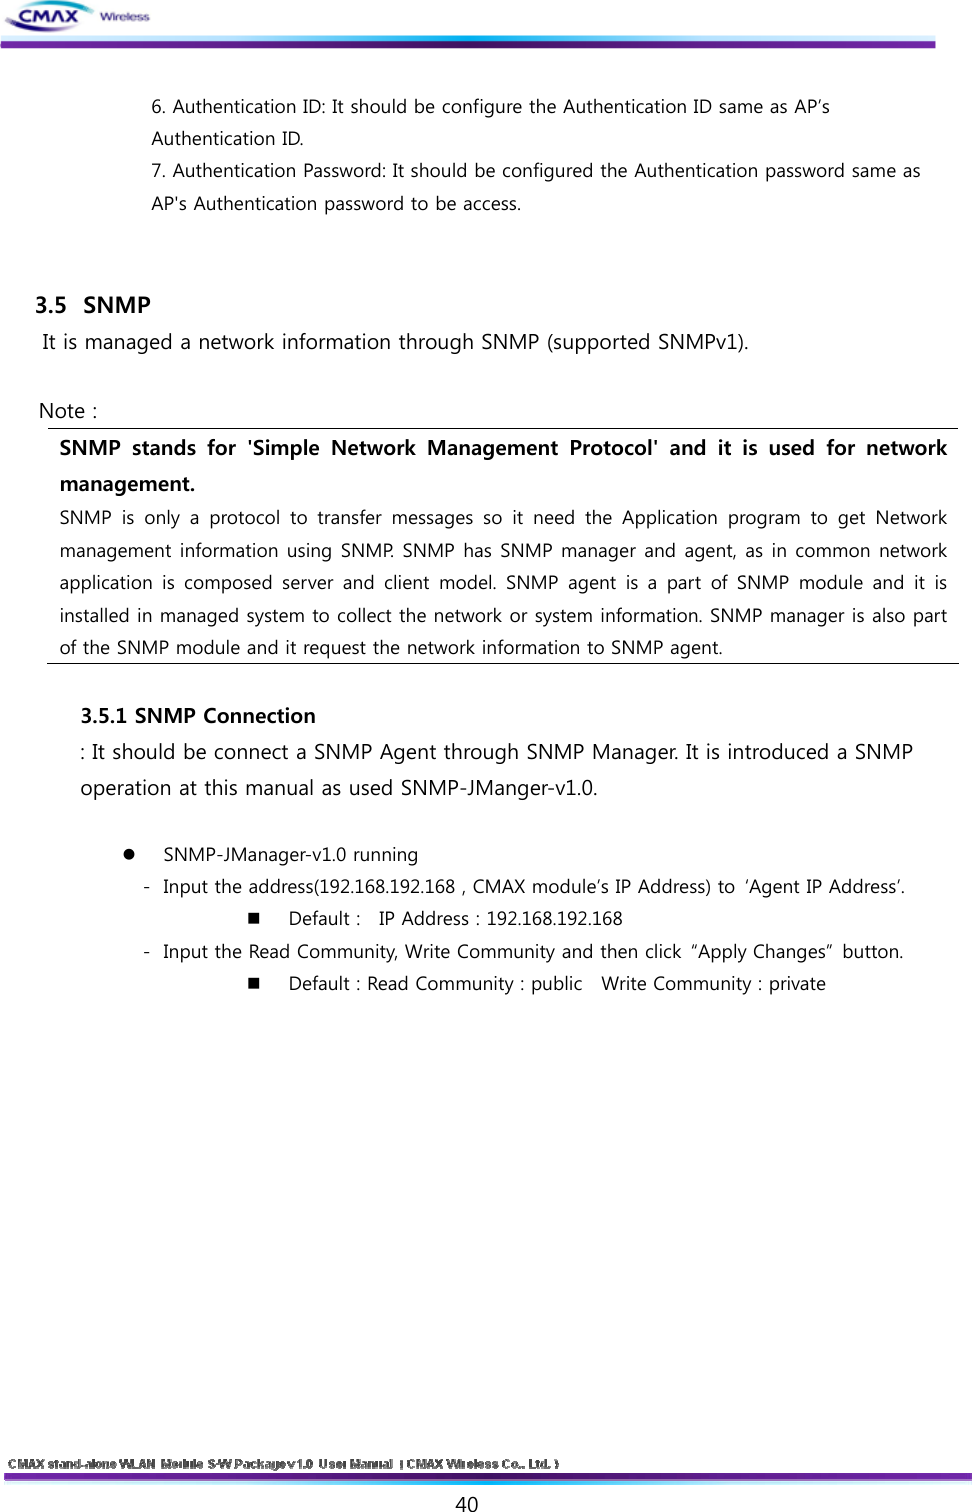   40    6. Authentication ID: It should be configure the Authentication ID same as AP’s Authentication ID.   7. Authentication Password: It should be configured the Authentication password same as AP&apos;s Authentication password to be access.   3.5  SNMP It is managed a network information through SNMP (supported SNMPv1).  Note :   SNMP  stands  for  &apos;Simple  Network  Management  Protocol&apos;  and  it  is  used  for  network management. SNMP is only a protocol to transfer messages so it need the Application  program  to  get  Network management information using SNMP. SNMP has SNMP manager and agent, as in common network application  is  composed  server and  client  model.  SNMP  agent  is  a part of SNMP module and it is installed in managed system to collect the network or system information. SNMP manager is also part of the SNMP module and it request the network information to SNMP agent.  3.5.1 SNMP Connection : It should be connect a SNMP Agent through SNMP Manager. It is introduced a SNMP   operation at this manual as used SNMP-JManger-v1.0.   SNMP-JManager-v1.0 running - Input the address(192.168.192.168 , CMAX module’s IP Address) to  ‘Agent IP Address’.   Default :    IP Address : 192.168.192.168 - Input the Read Community, Write Community and then click “Apply Changes” button.  Default : Read Community : public   Write Community : private 